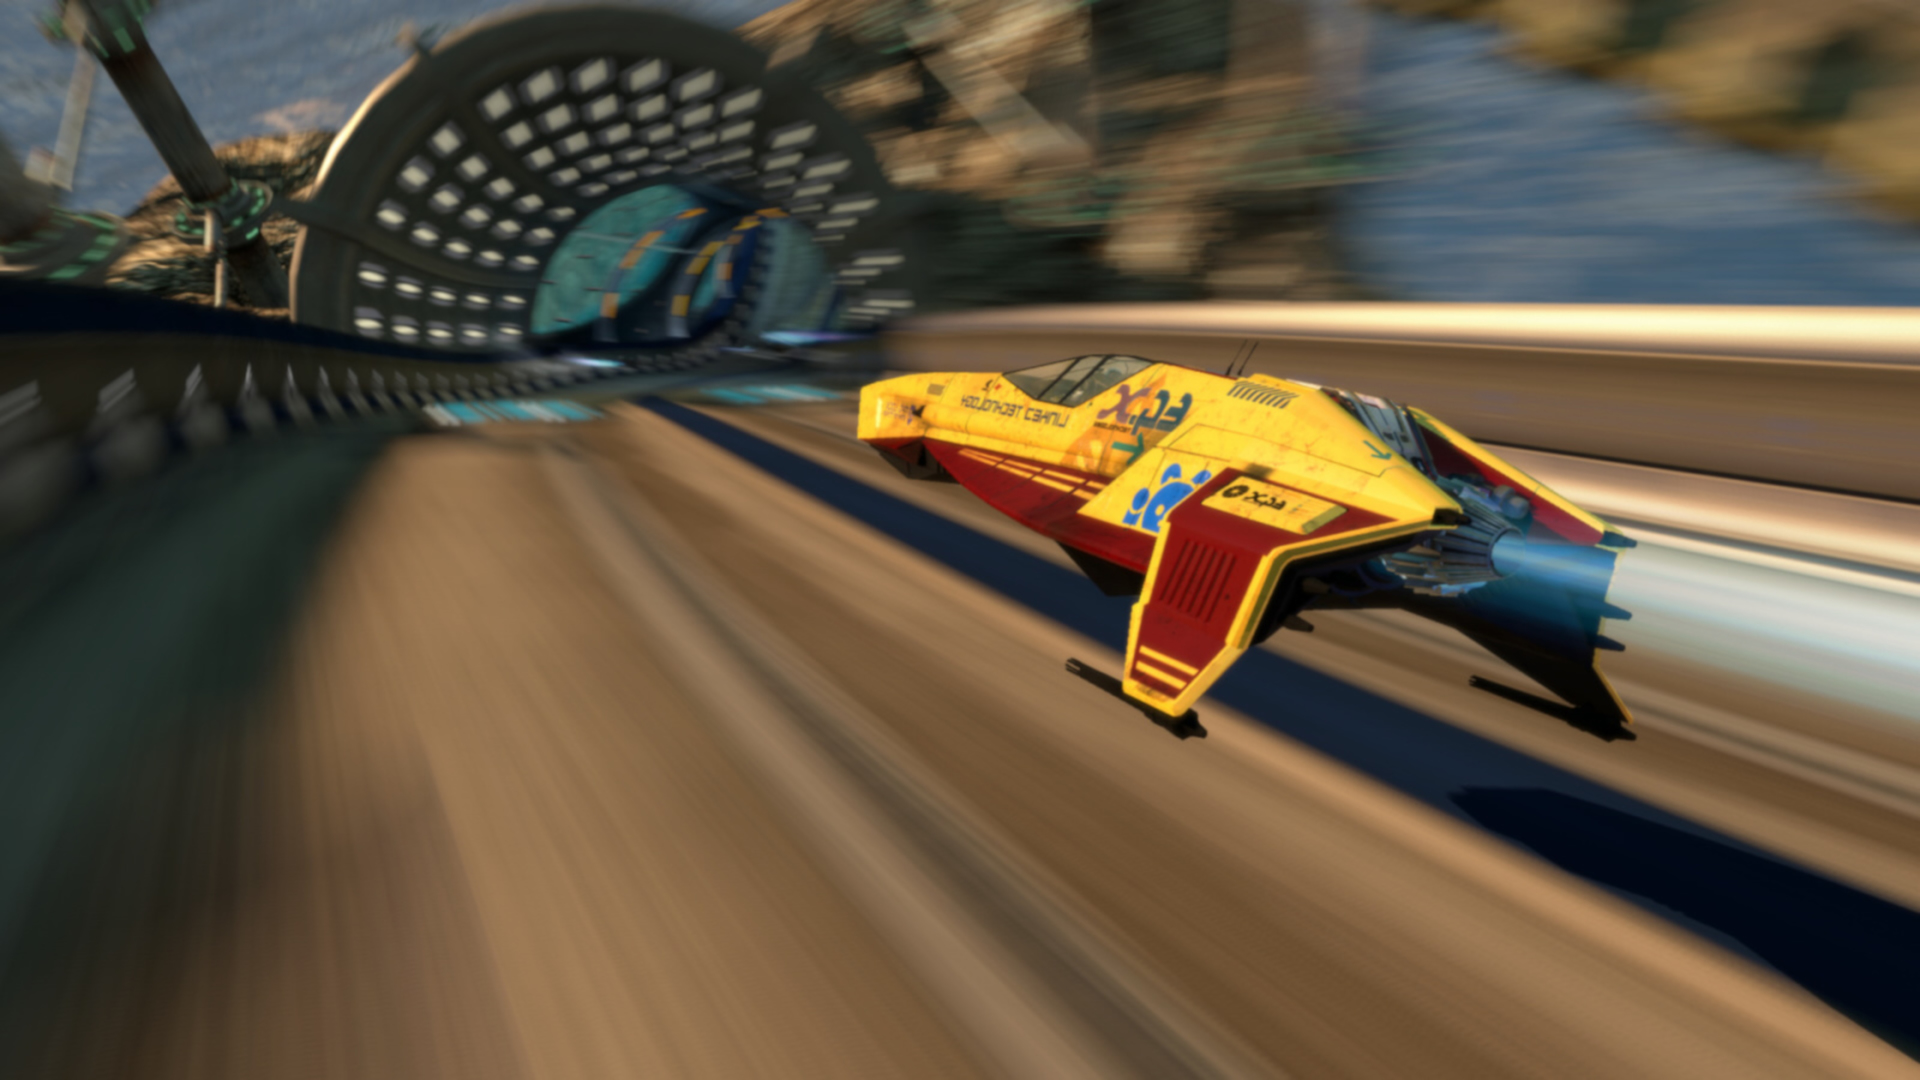 Wipeout 3 Details Launchbox Games Database